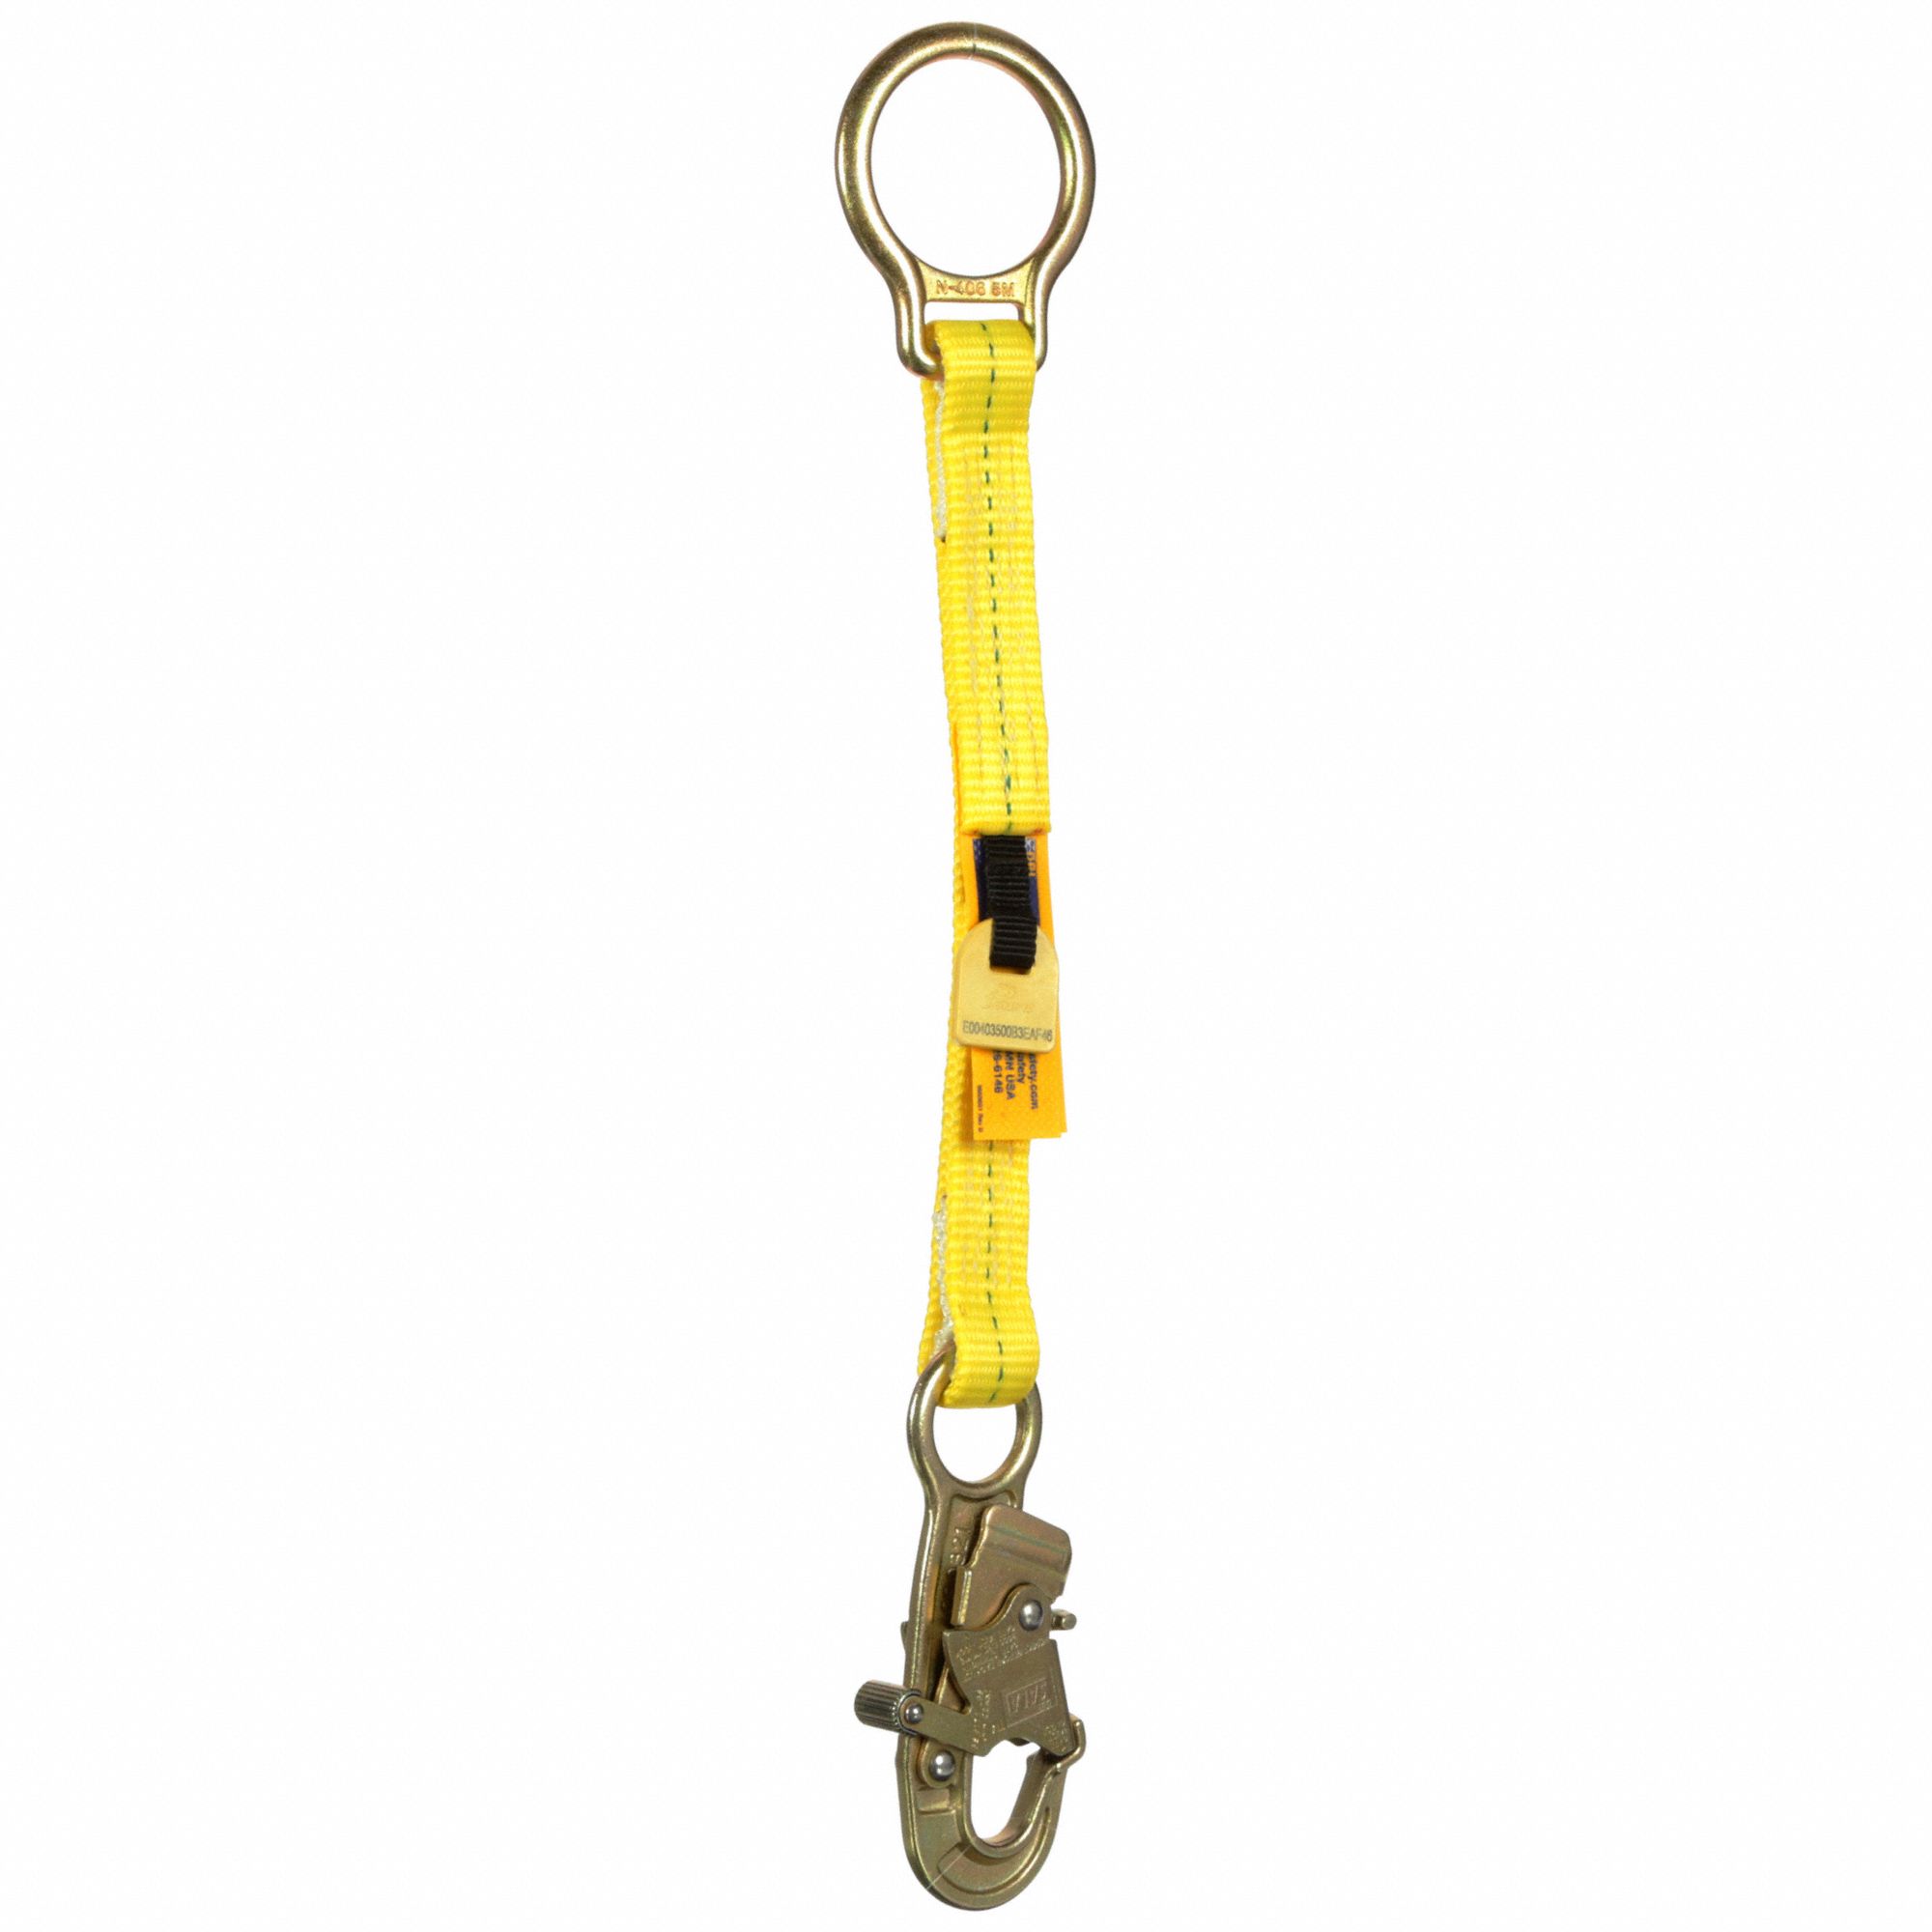 Harness Depot D-Ring Extender with Loop - The Harness Depot